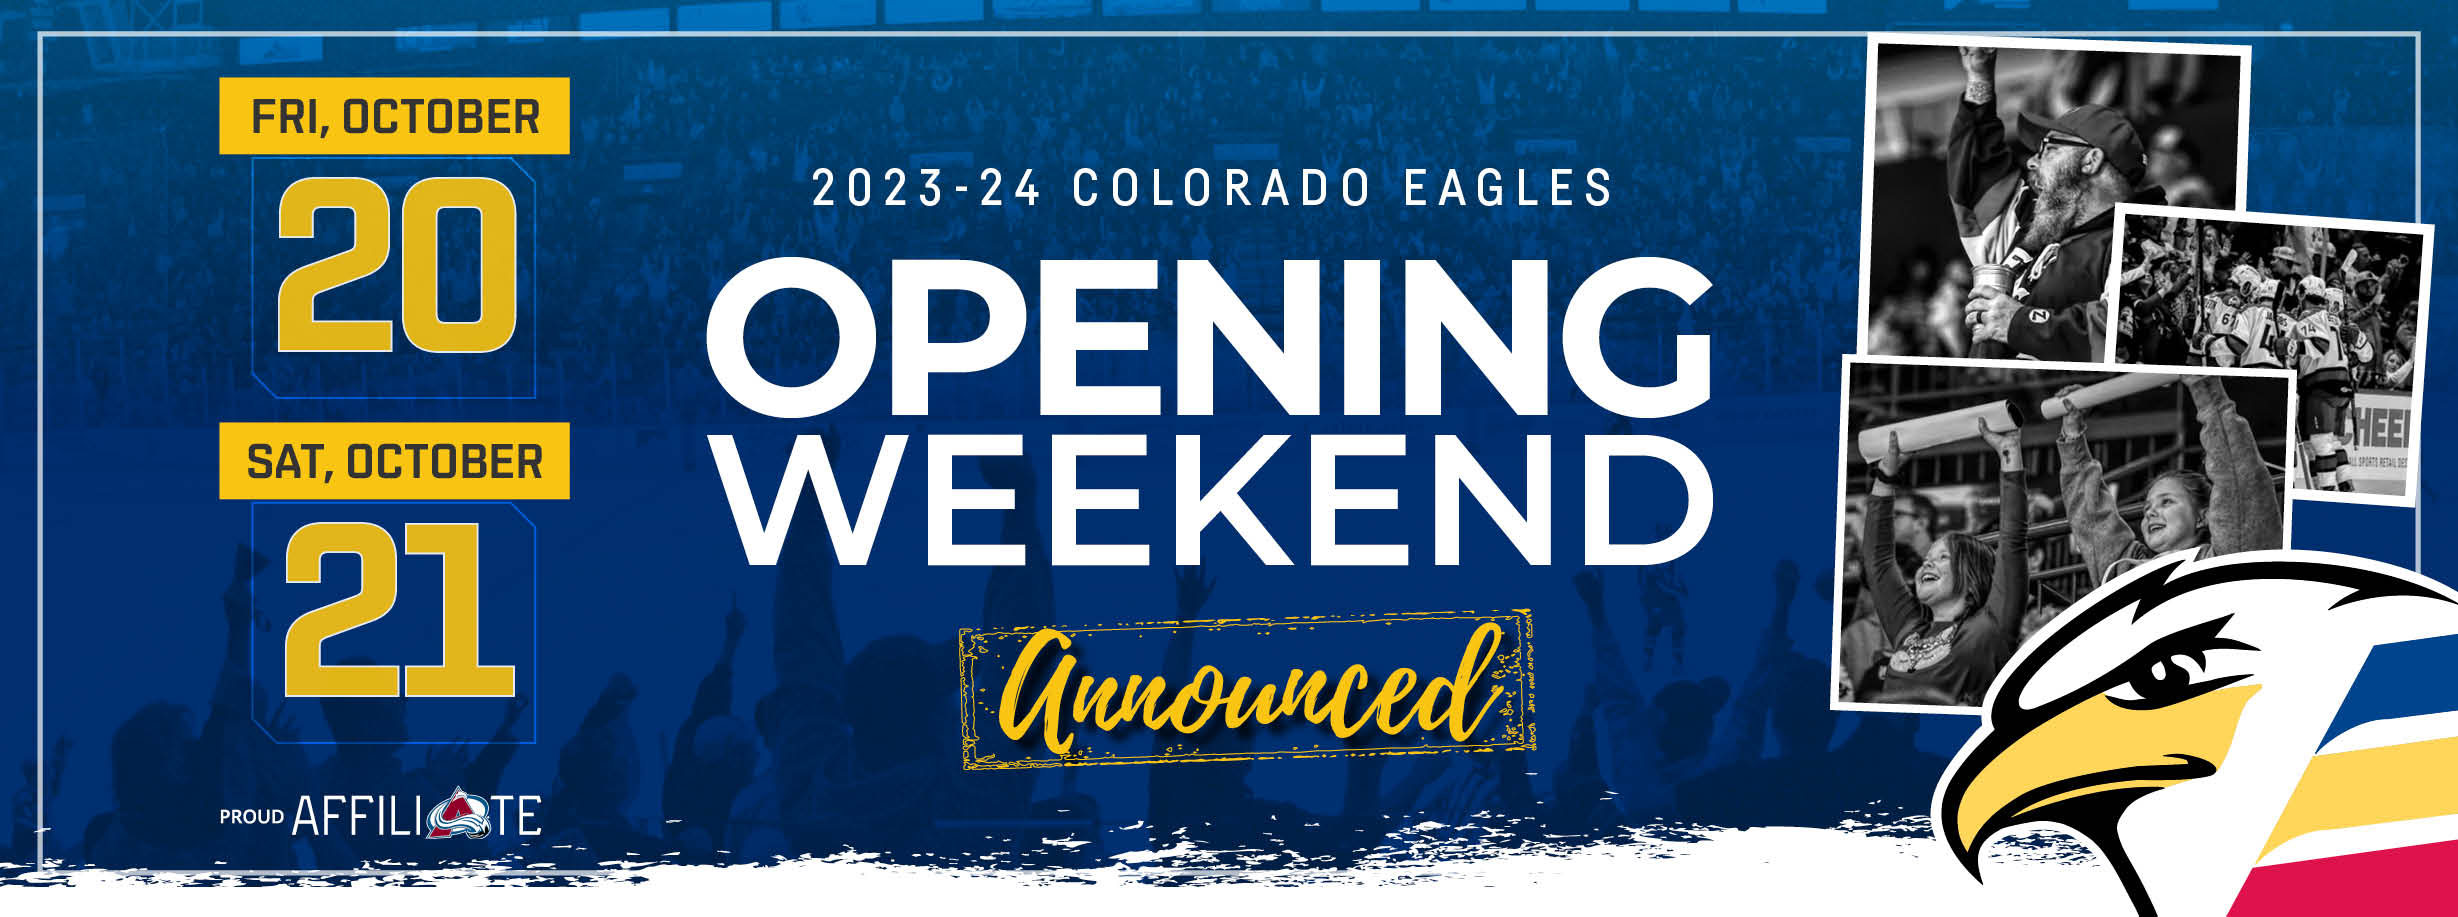 Opening Weekend Dates Announced - Sign up for Pre-Sale Alerts!